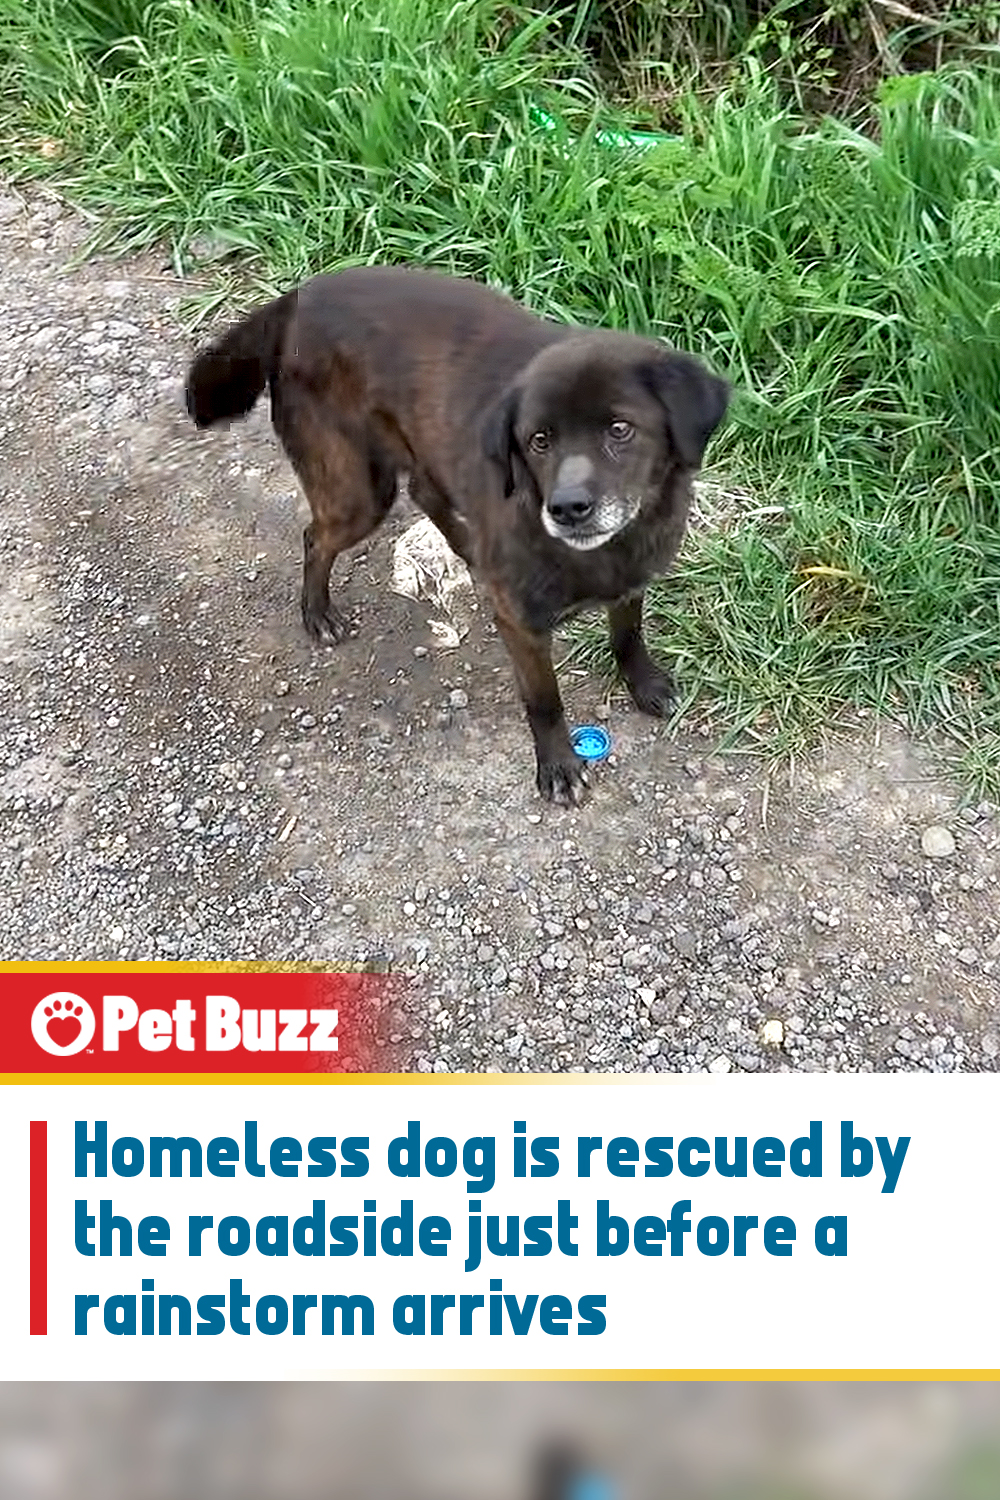 Homeless dog is rescued by the roadside just before a rainstorm arrives